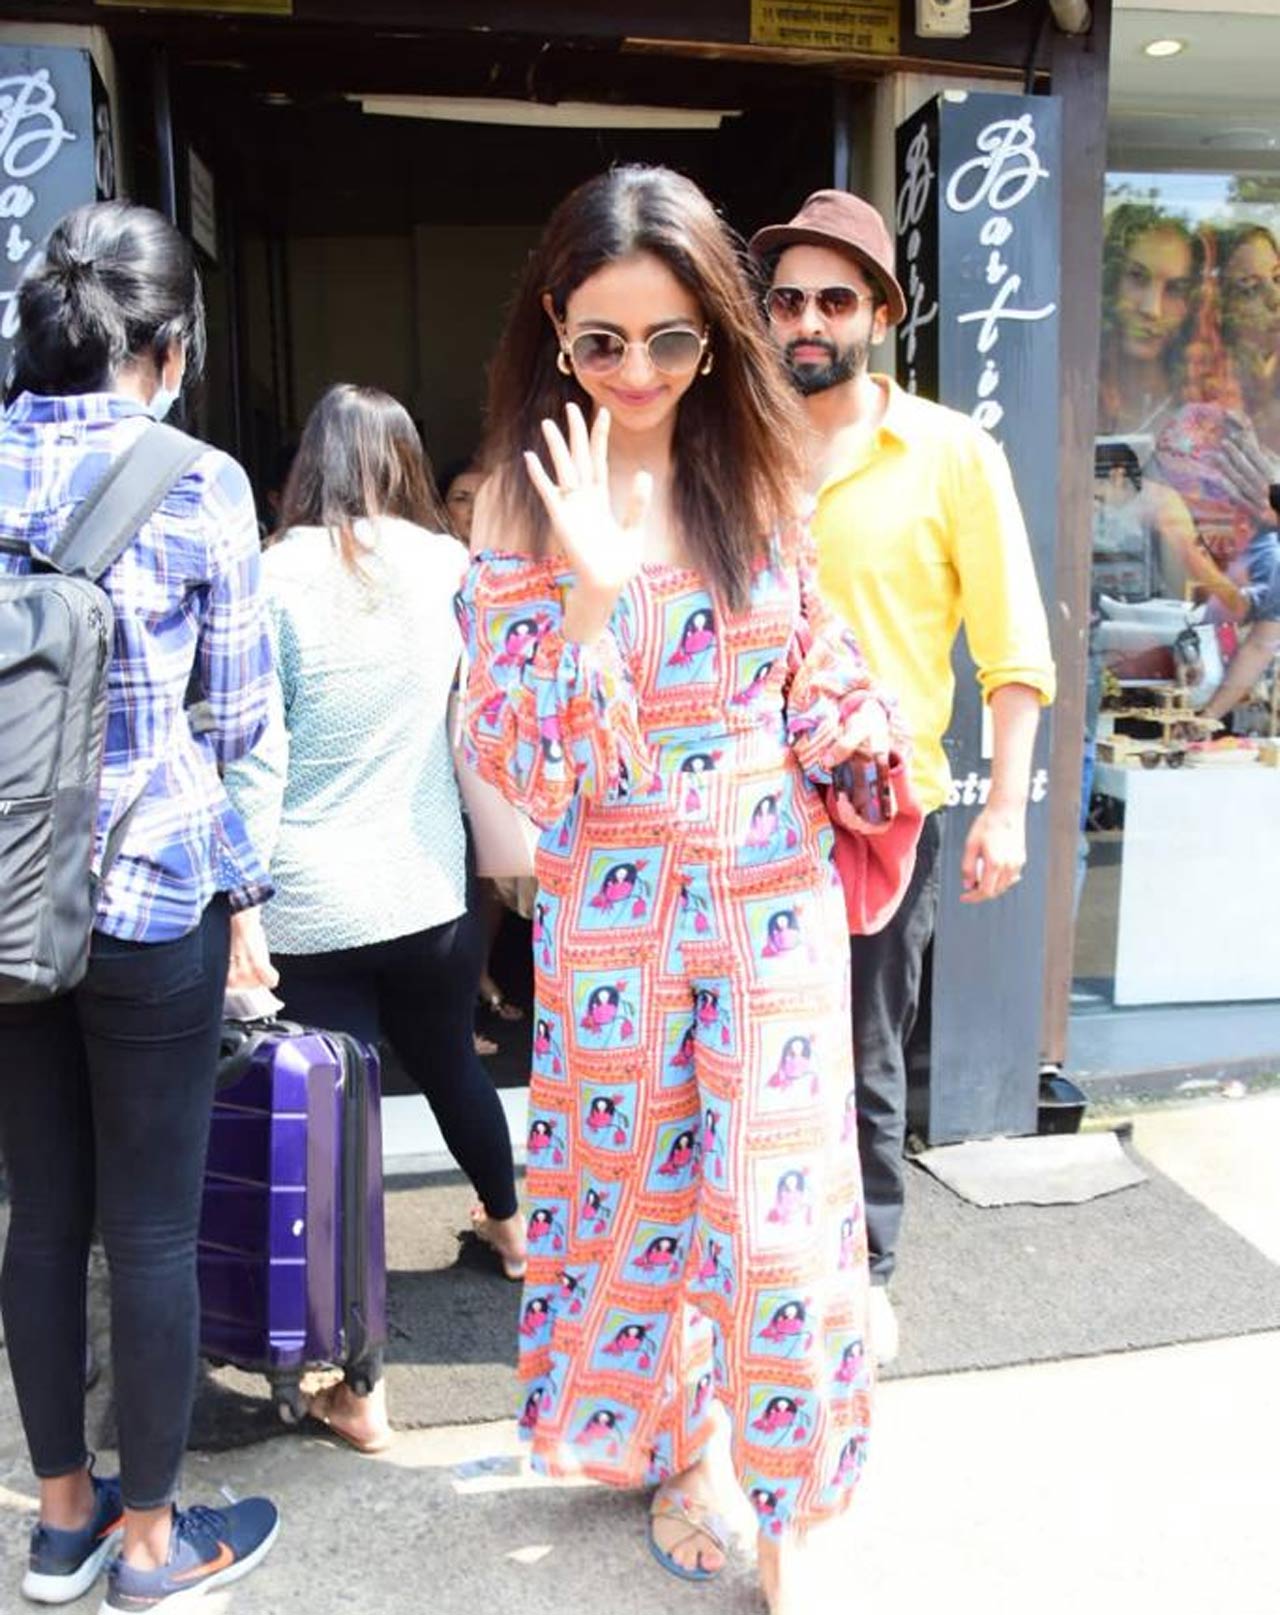 Both Rakul Preet Singh and Jackky Bhagnani were dressed in cool yet casual attires. The duo has been spotted together on multiple occasions before